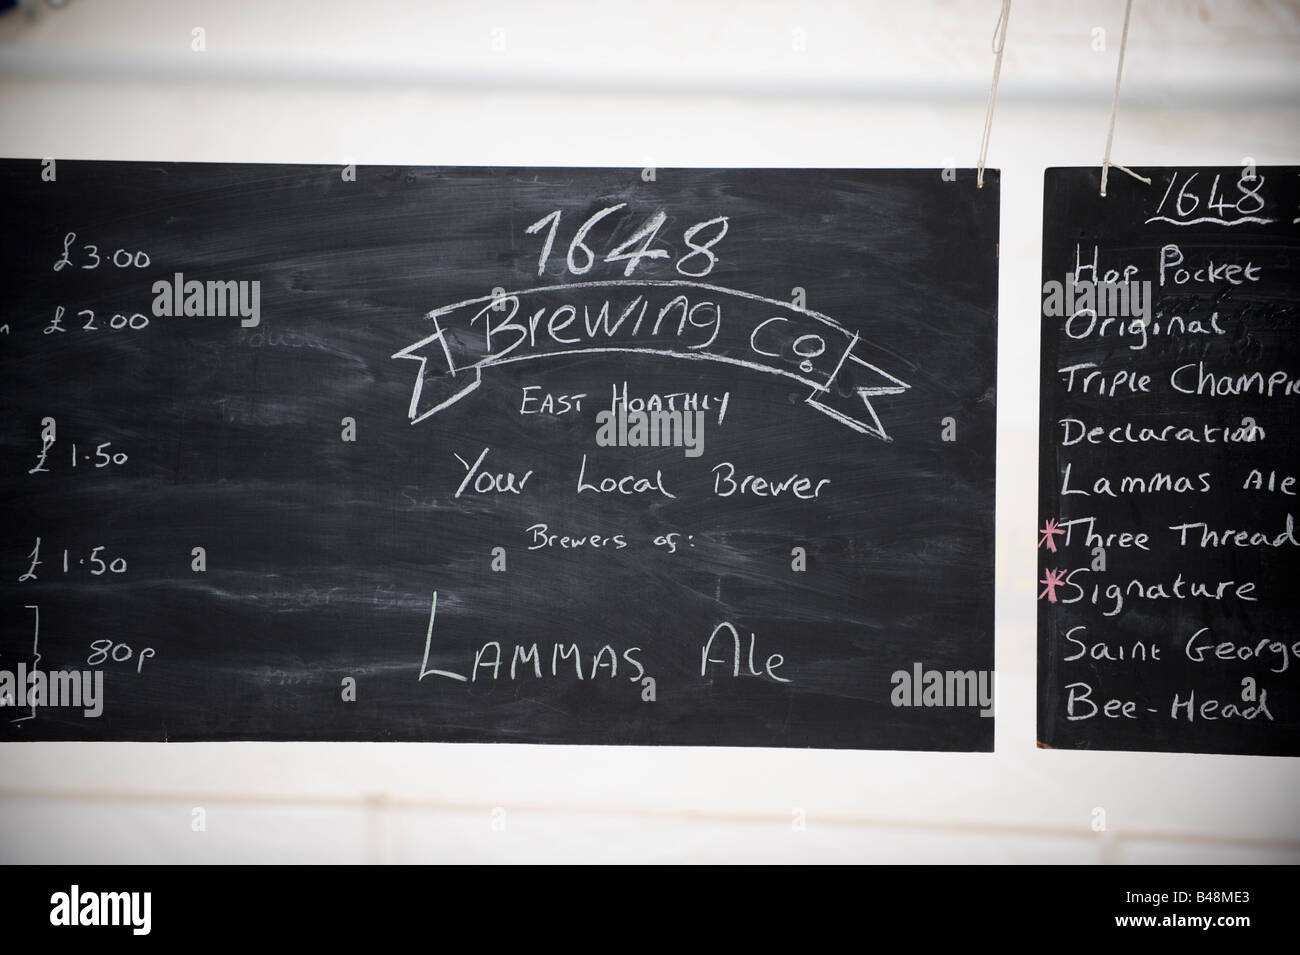 The 1648 Brewing Company: prices above the bar at the Lammas Beer festival Eastbourne 2008. Stock Photo